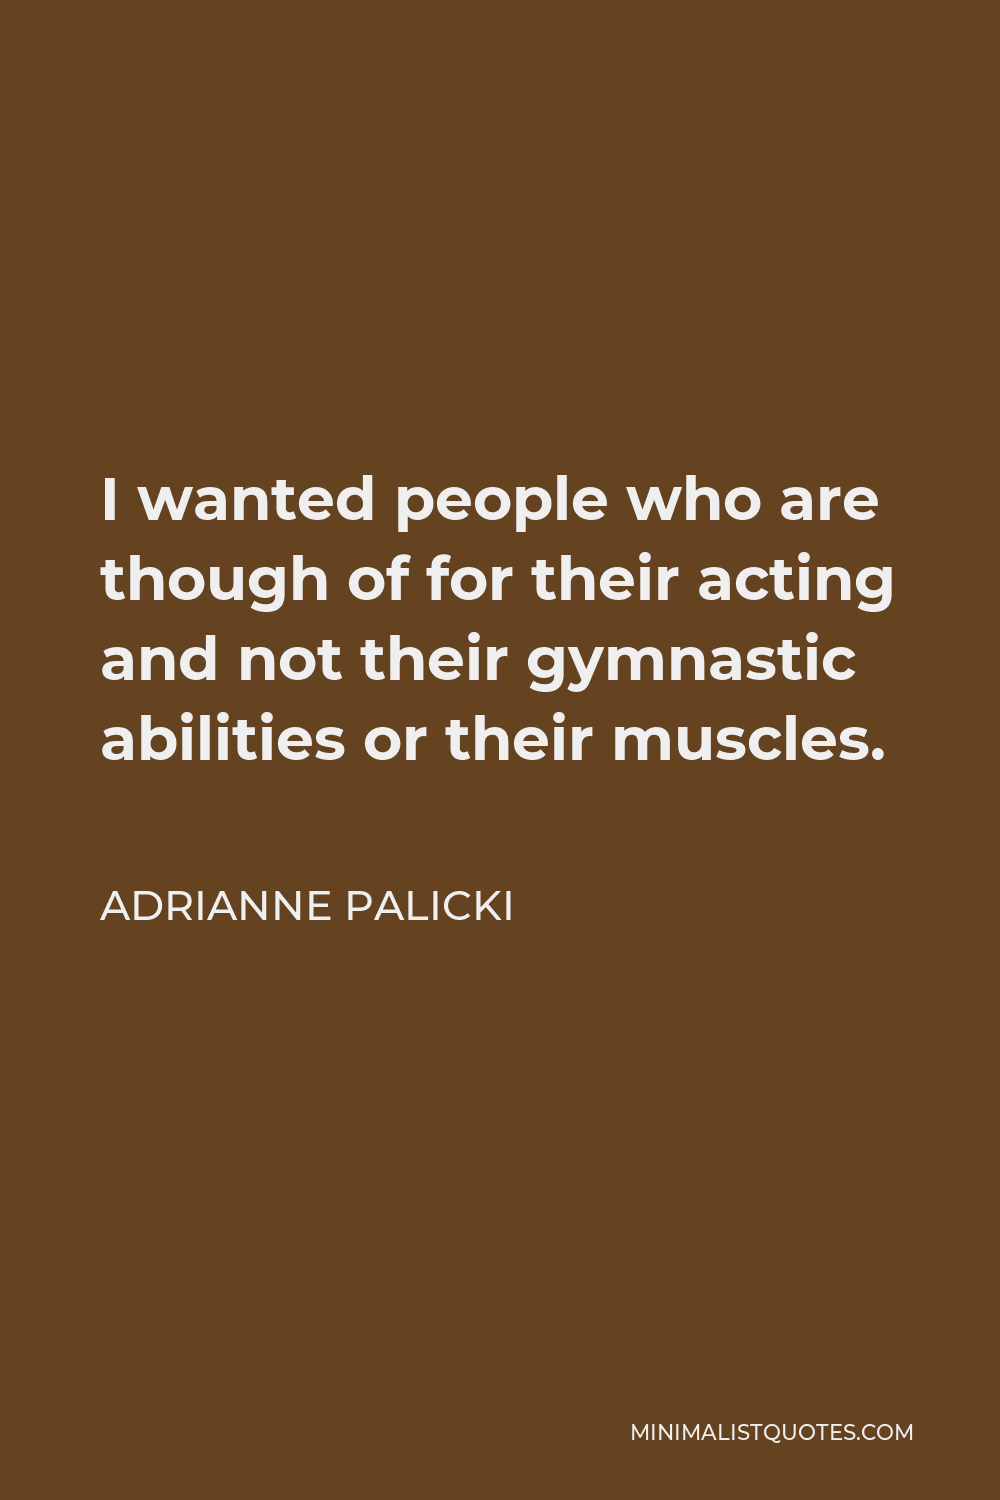 Adrianne Palicki Quote - I wanted people who are though of for their acting and not their gymnastic abilities or their muscles.